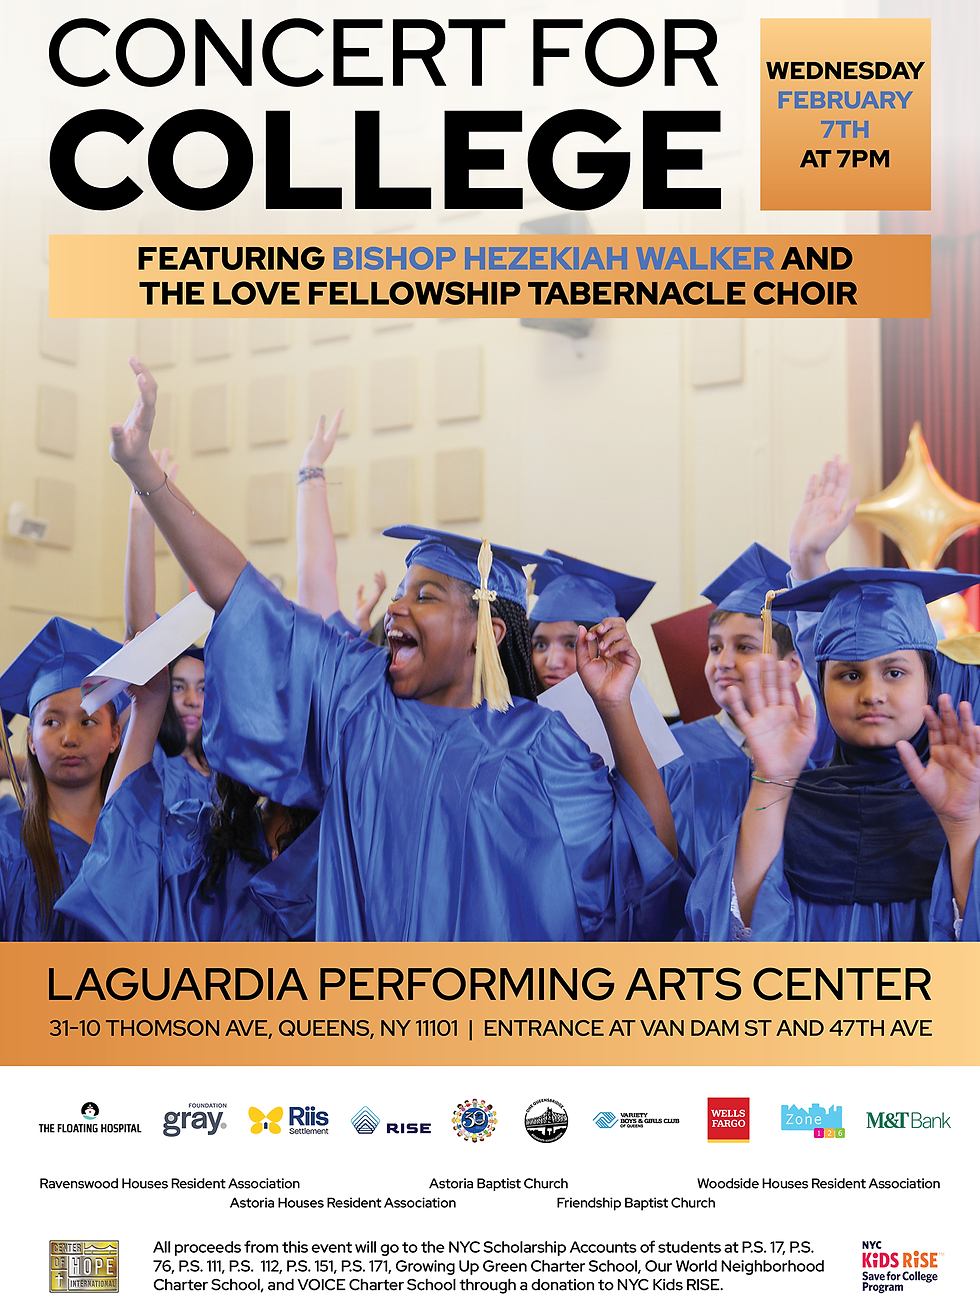 Concert for College at LaGuardia Performing Arts Center!